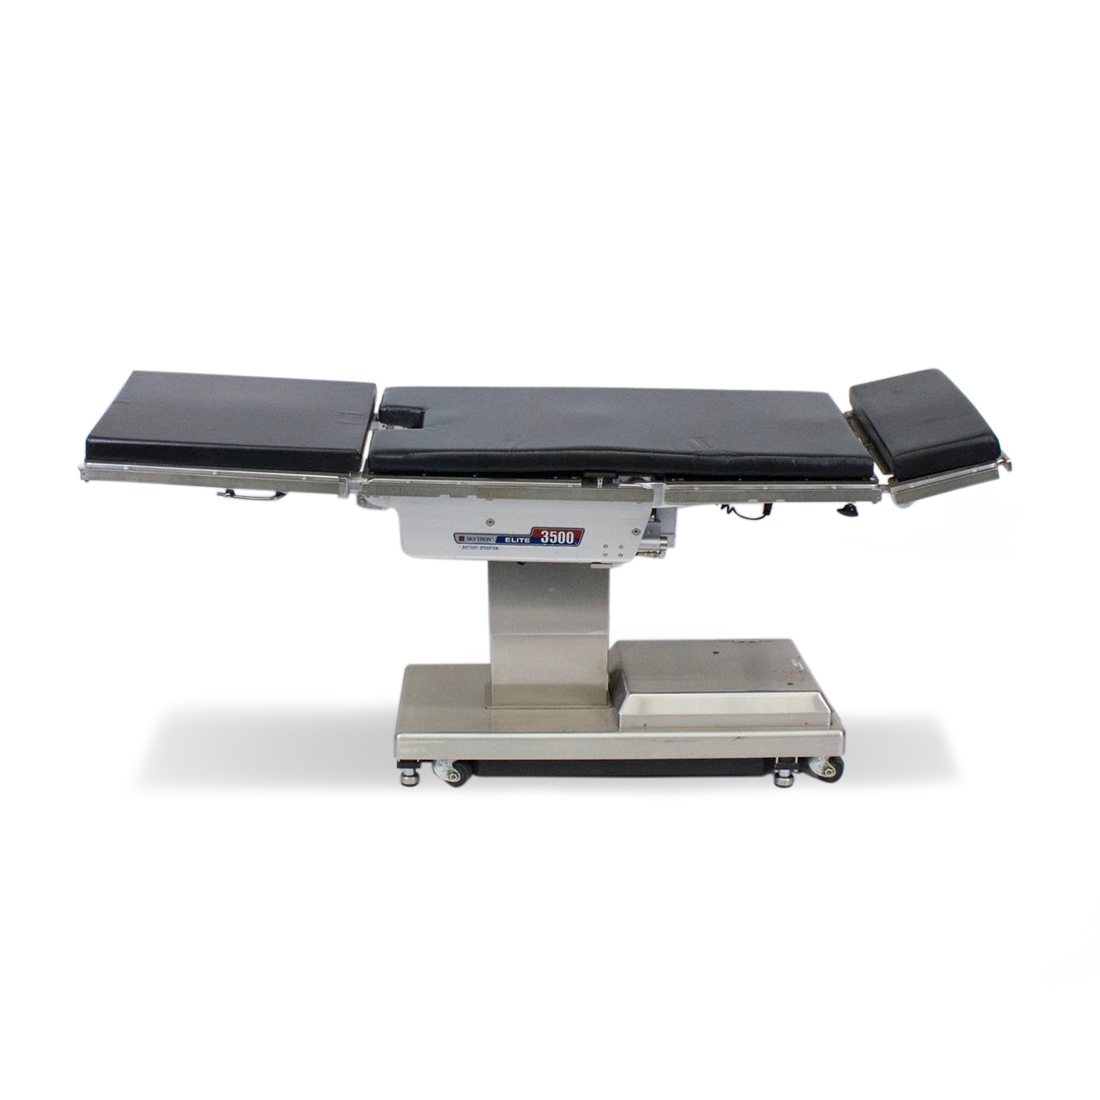 Skytron 3500 General Surgical Table